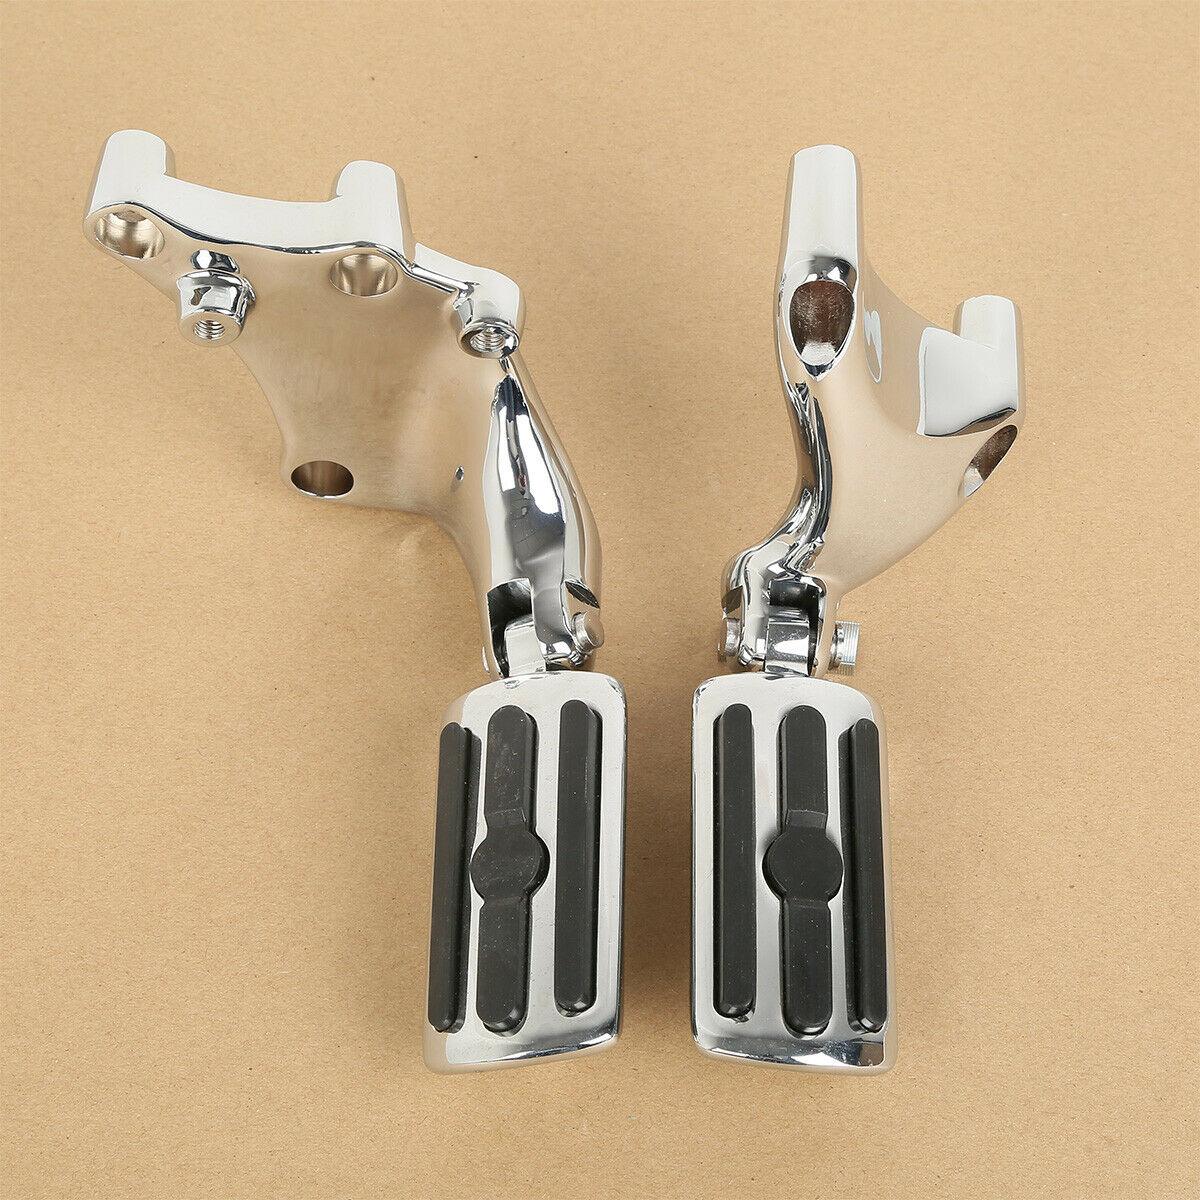 Foot Pegs Mount Bracket Fit For Harley Sportster 883 1200 XL 48 72 2014-2022 US - Moto Life Products